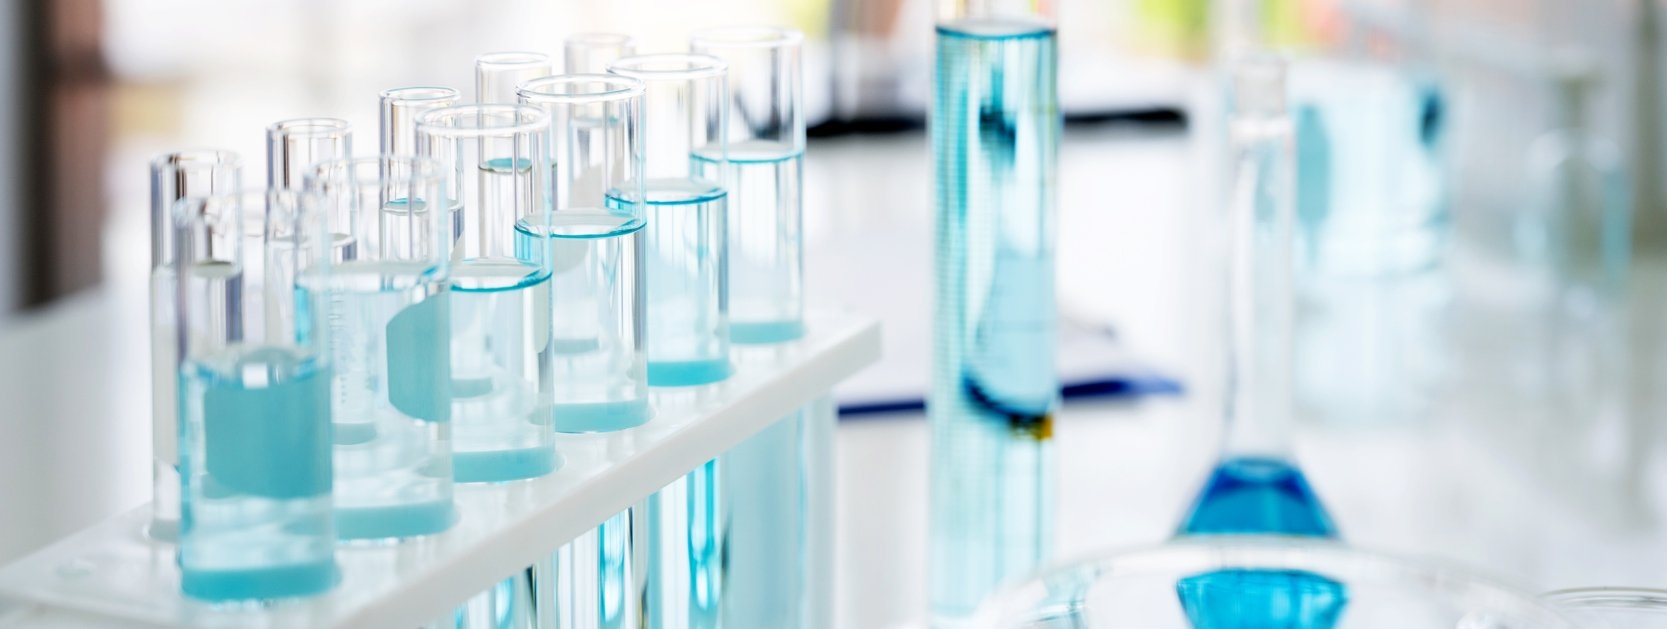 A laboratory with test tubes containing blue liquid, used for scientific experiments and research.